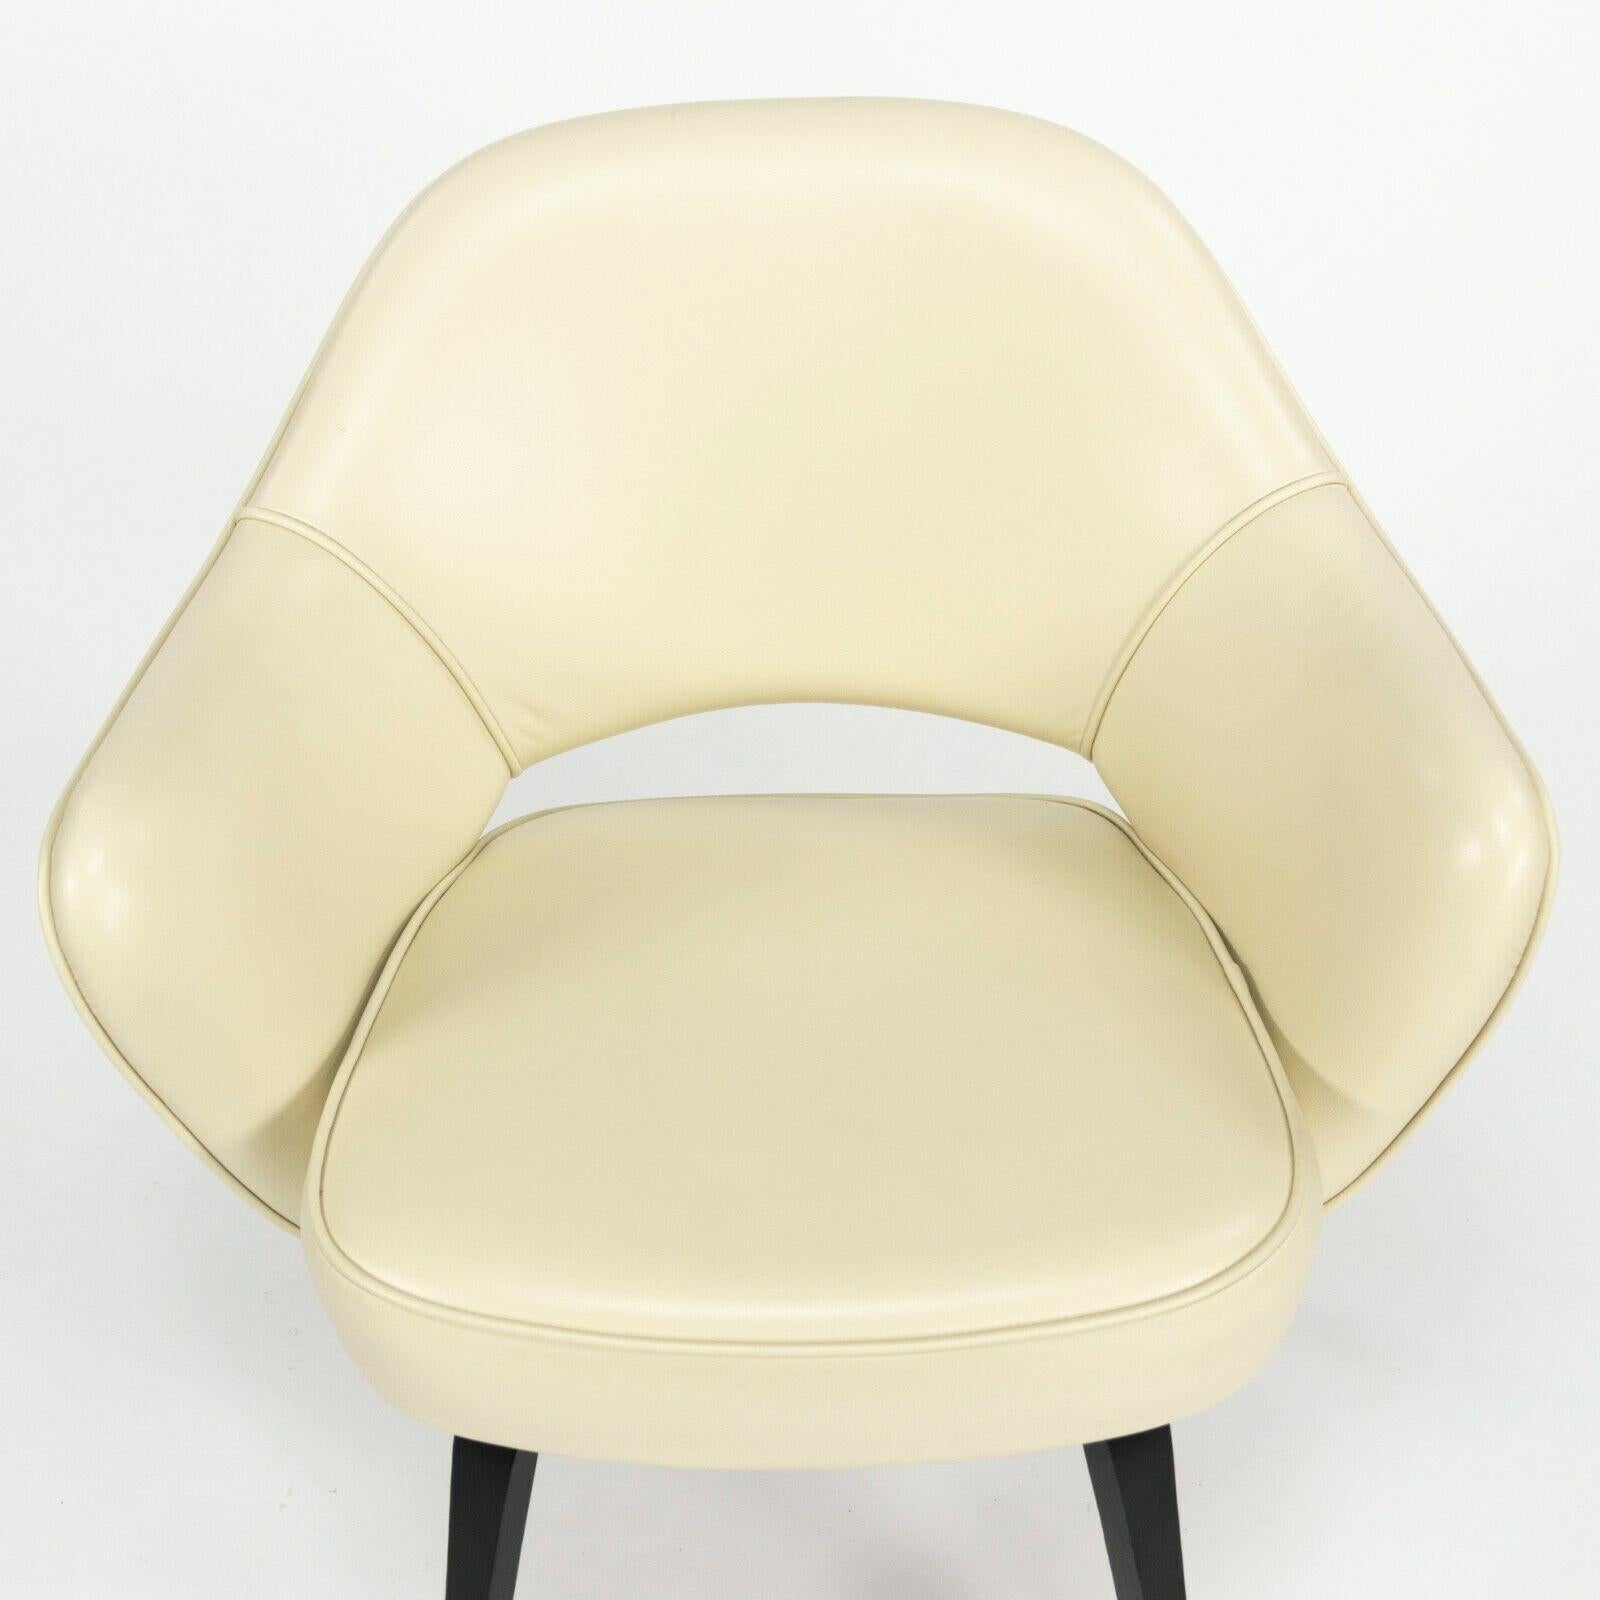 Eero Saarinen for Knoll 2020 Executive Armchair with Ivory Leather & Wood Legs For Sale 6